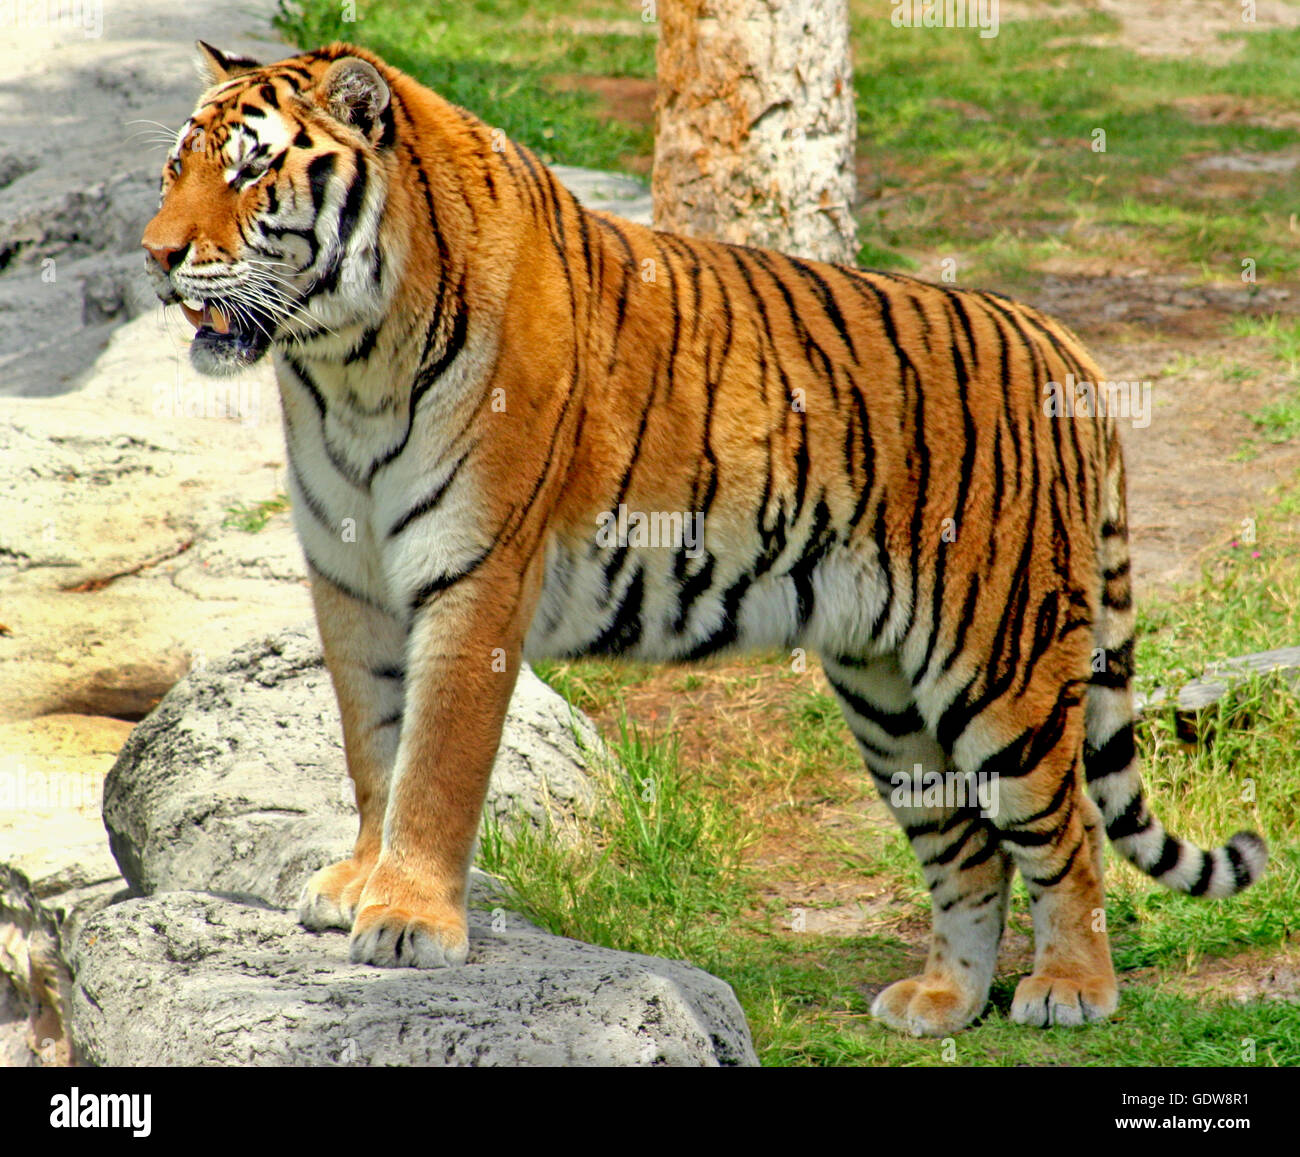 Tiger standing on a rock looking peaceful Stock Photo